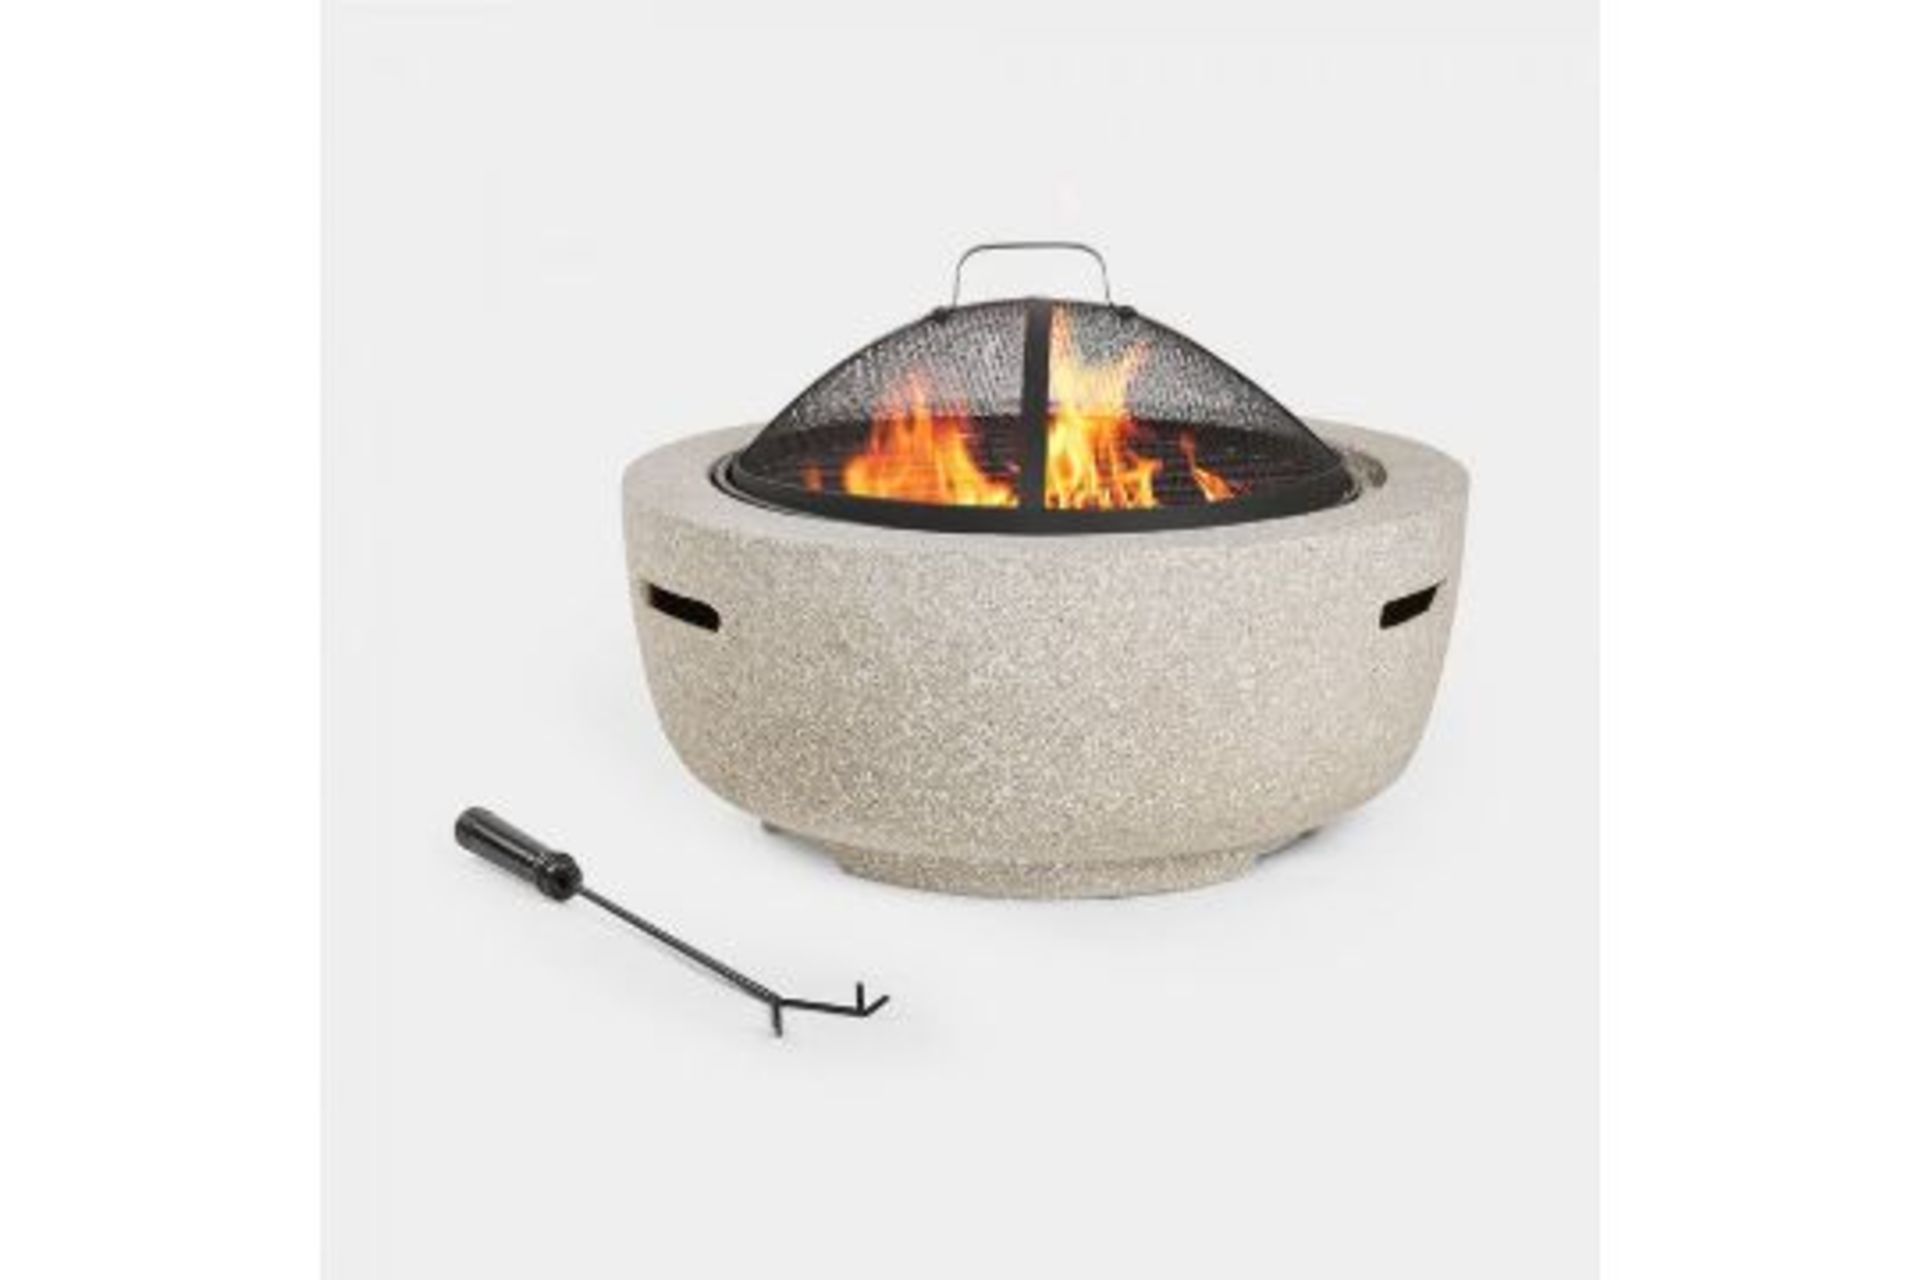 New Boxed - Round MgO Fire Pit (REF702- ROW6). Don’t let the onset of evening curtail your day in